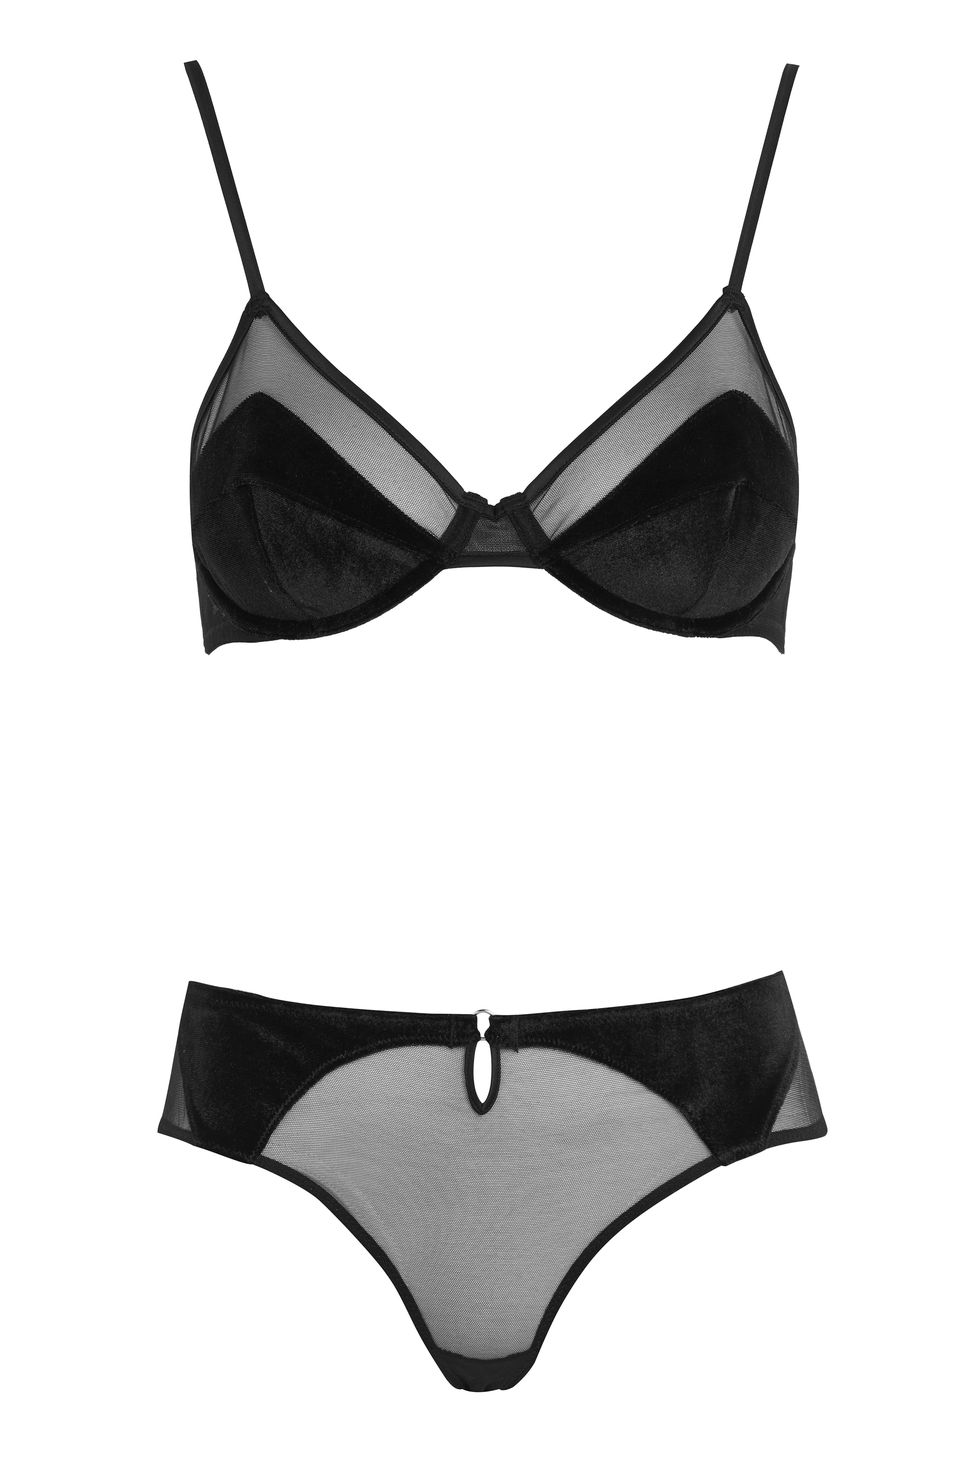 Kendall + Kylie KENDALL and KYLIE Embroidered Mesh Balconette Bra